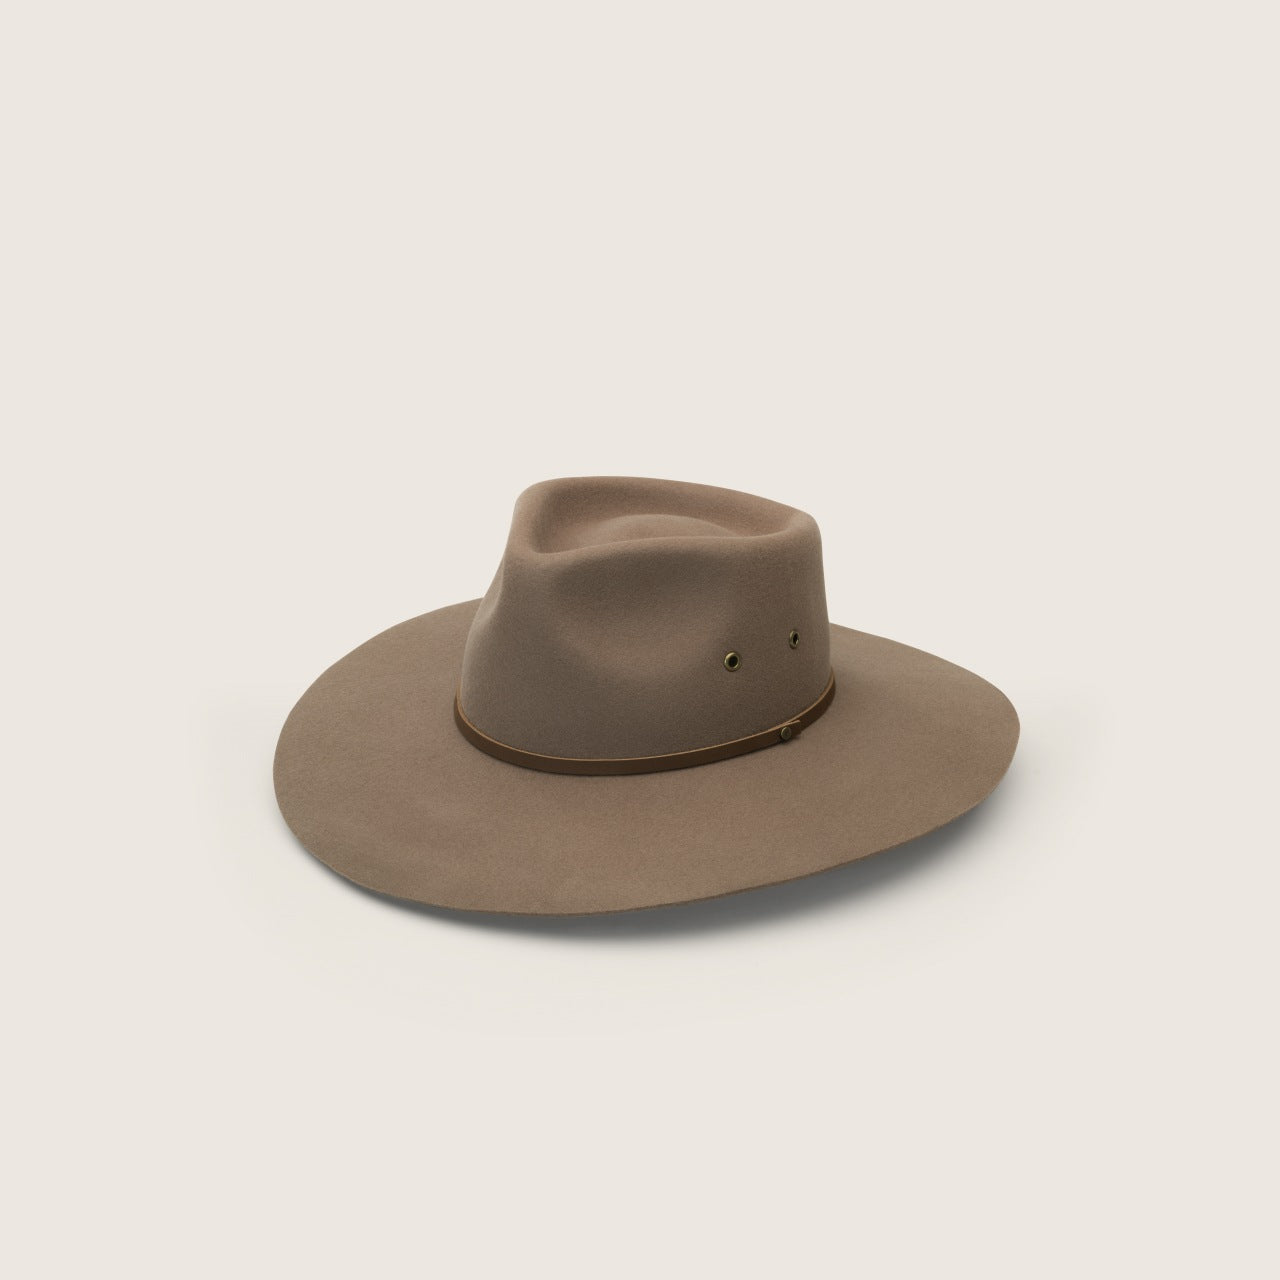 Australian Outback Explorer hat taupe brown front view